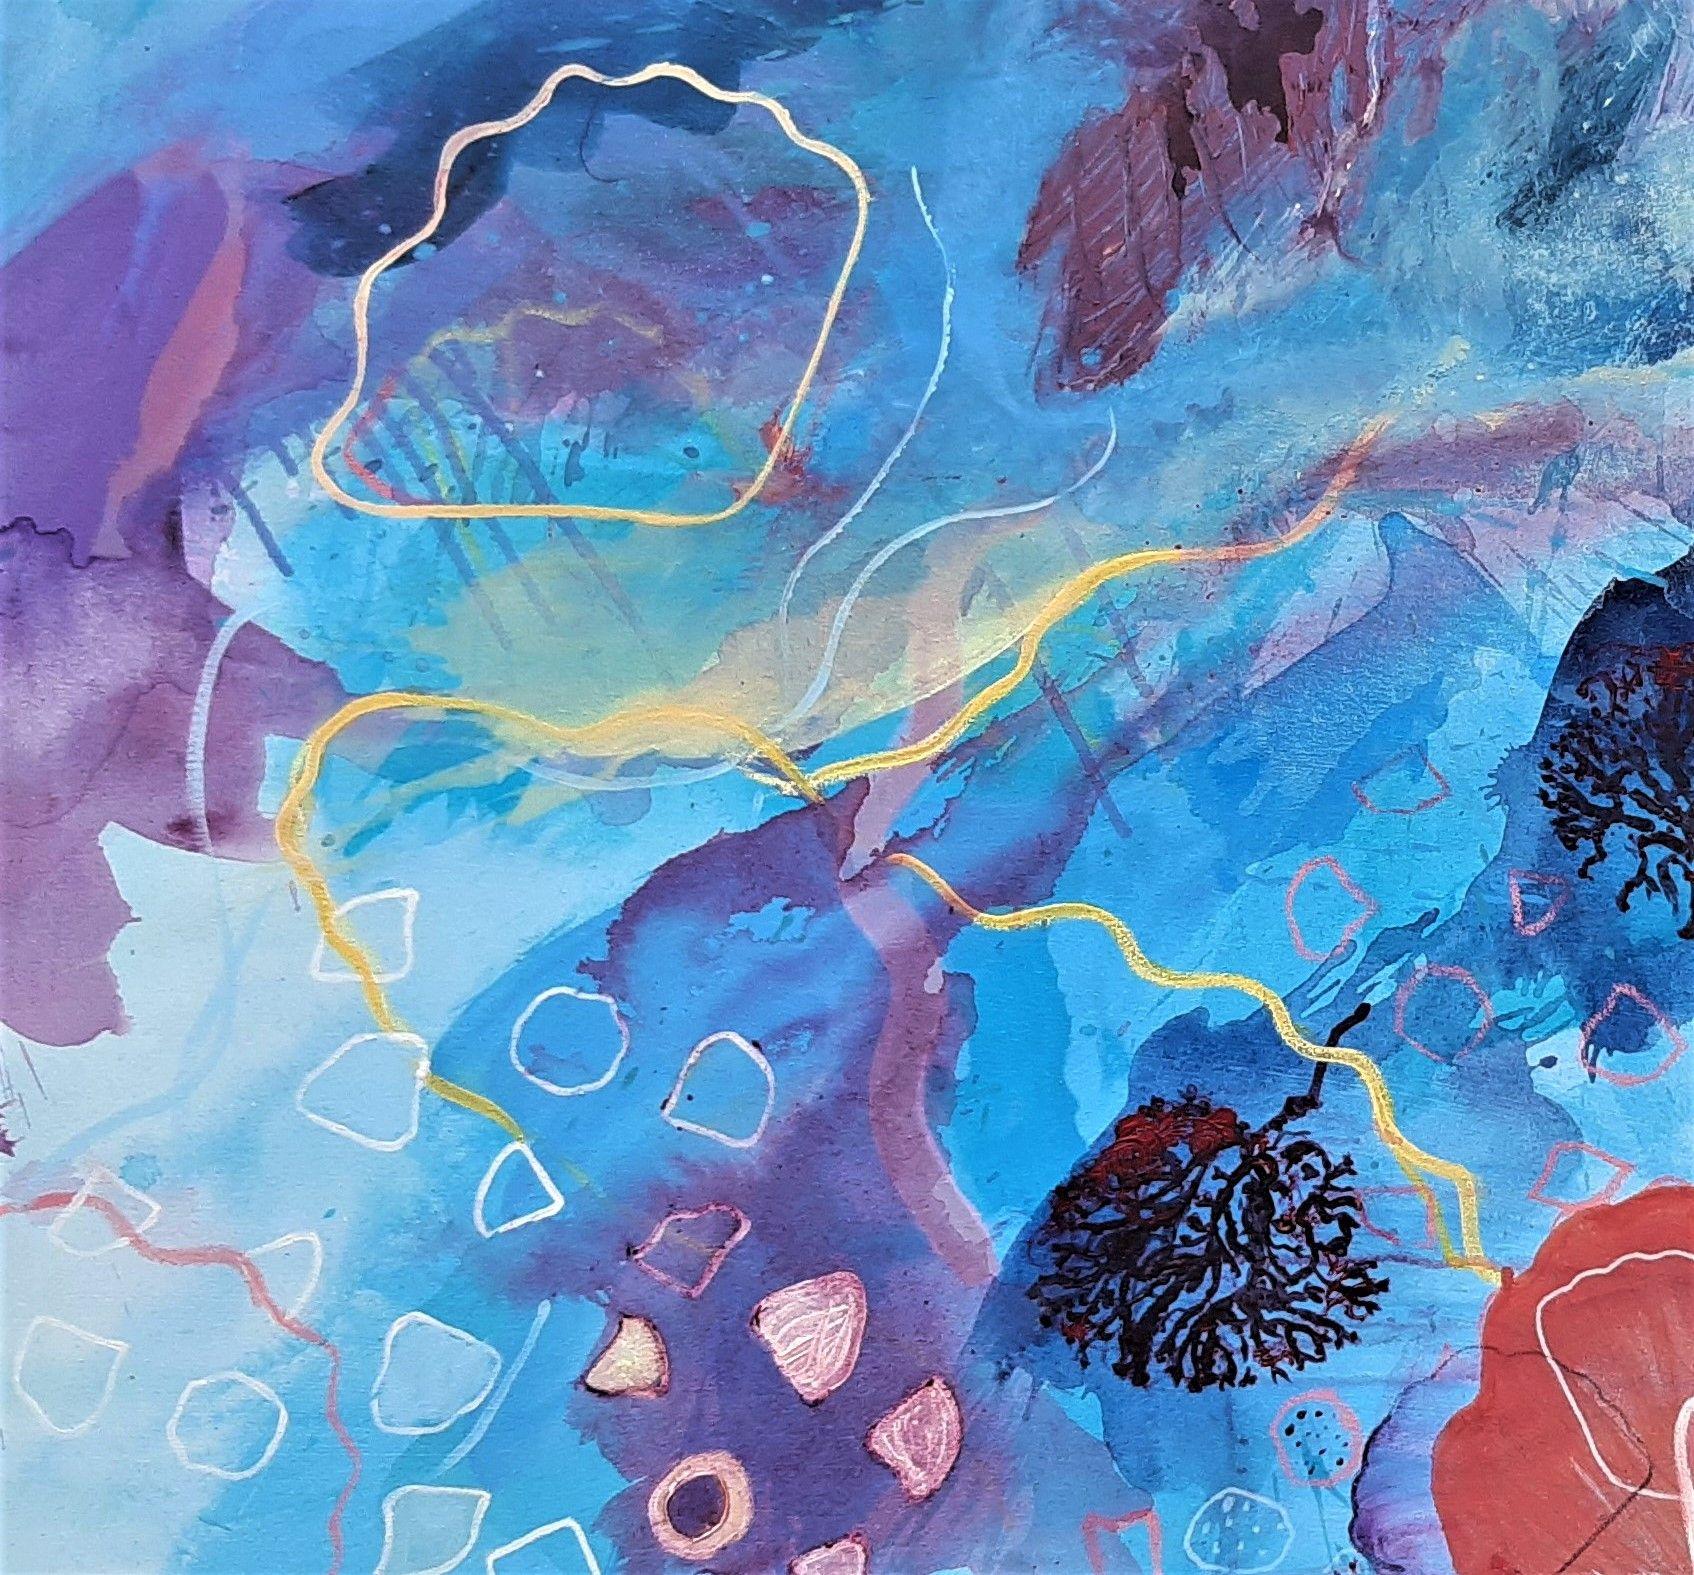 The painting 'Breakaway Blue', is part of the ongoing sea garden series. Inspiration is taken from rock pools and the movement of the water in between high and low tide. The energy and power of the water as it washes over the rocks into the pools.